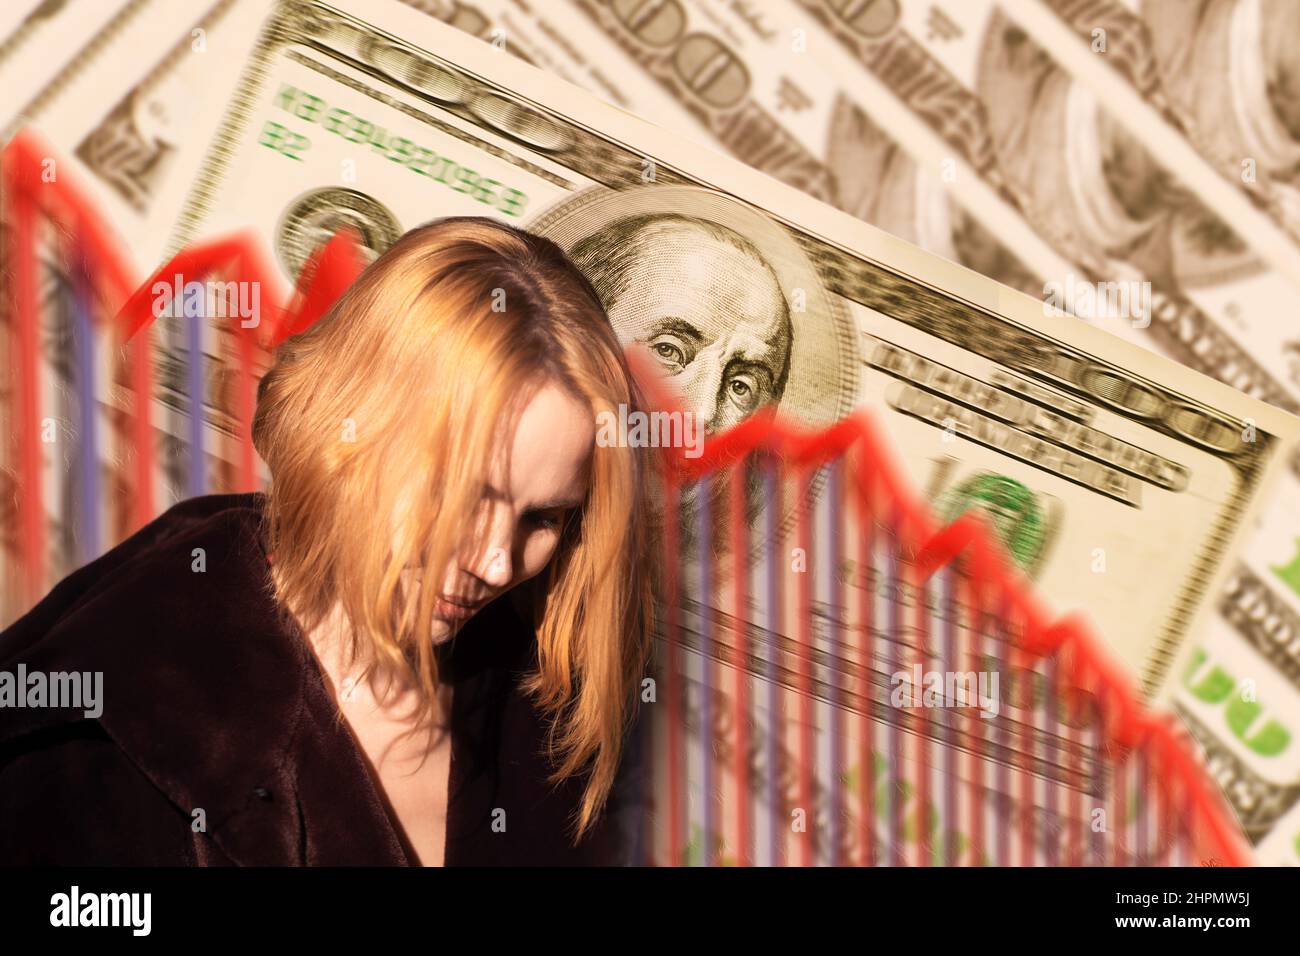 Unemployment, inflation concept. Decrease chart and US dollars on the background. Sad woman with her head bowed. Dismissal, crisis, job loss. Stock Photo